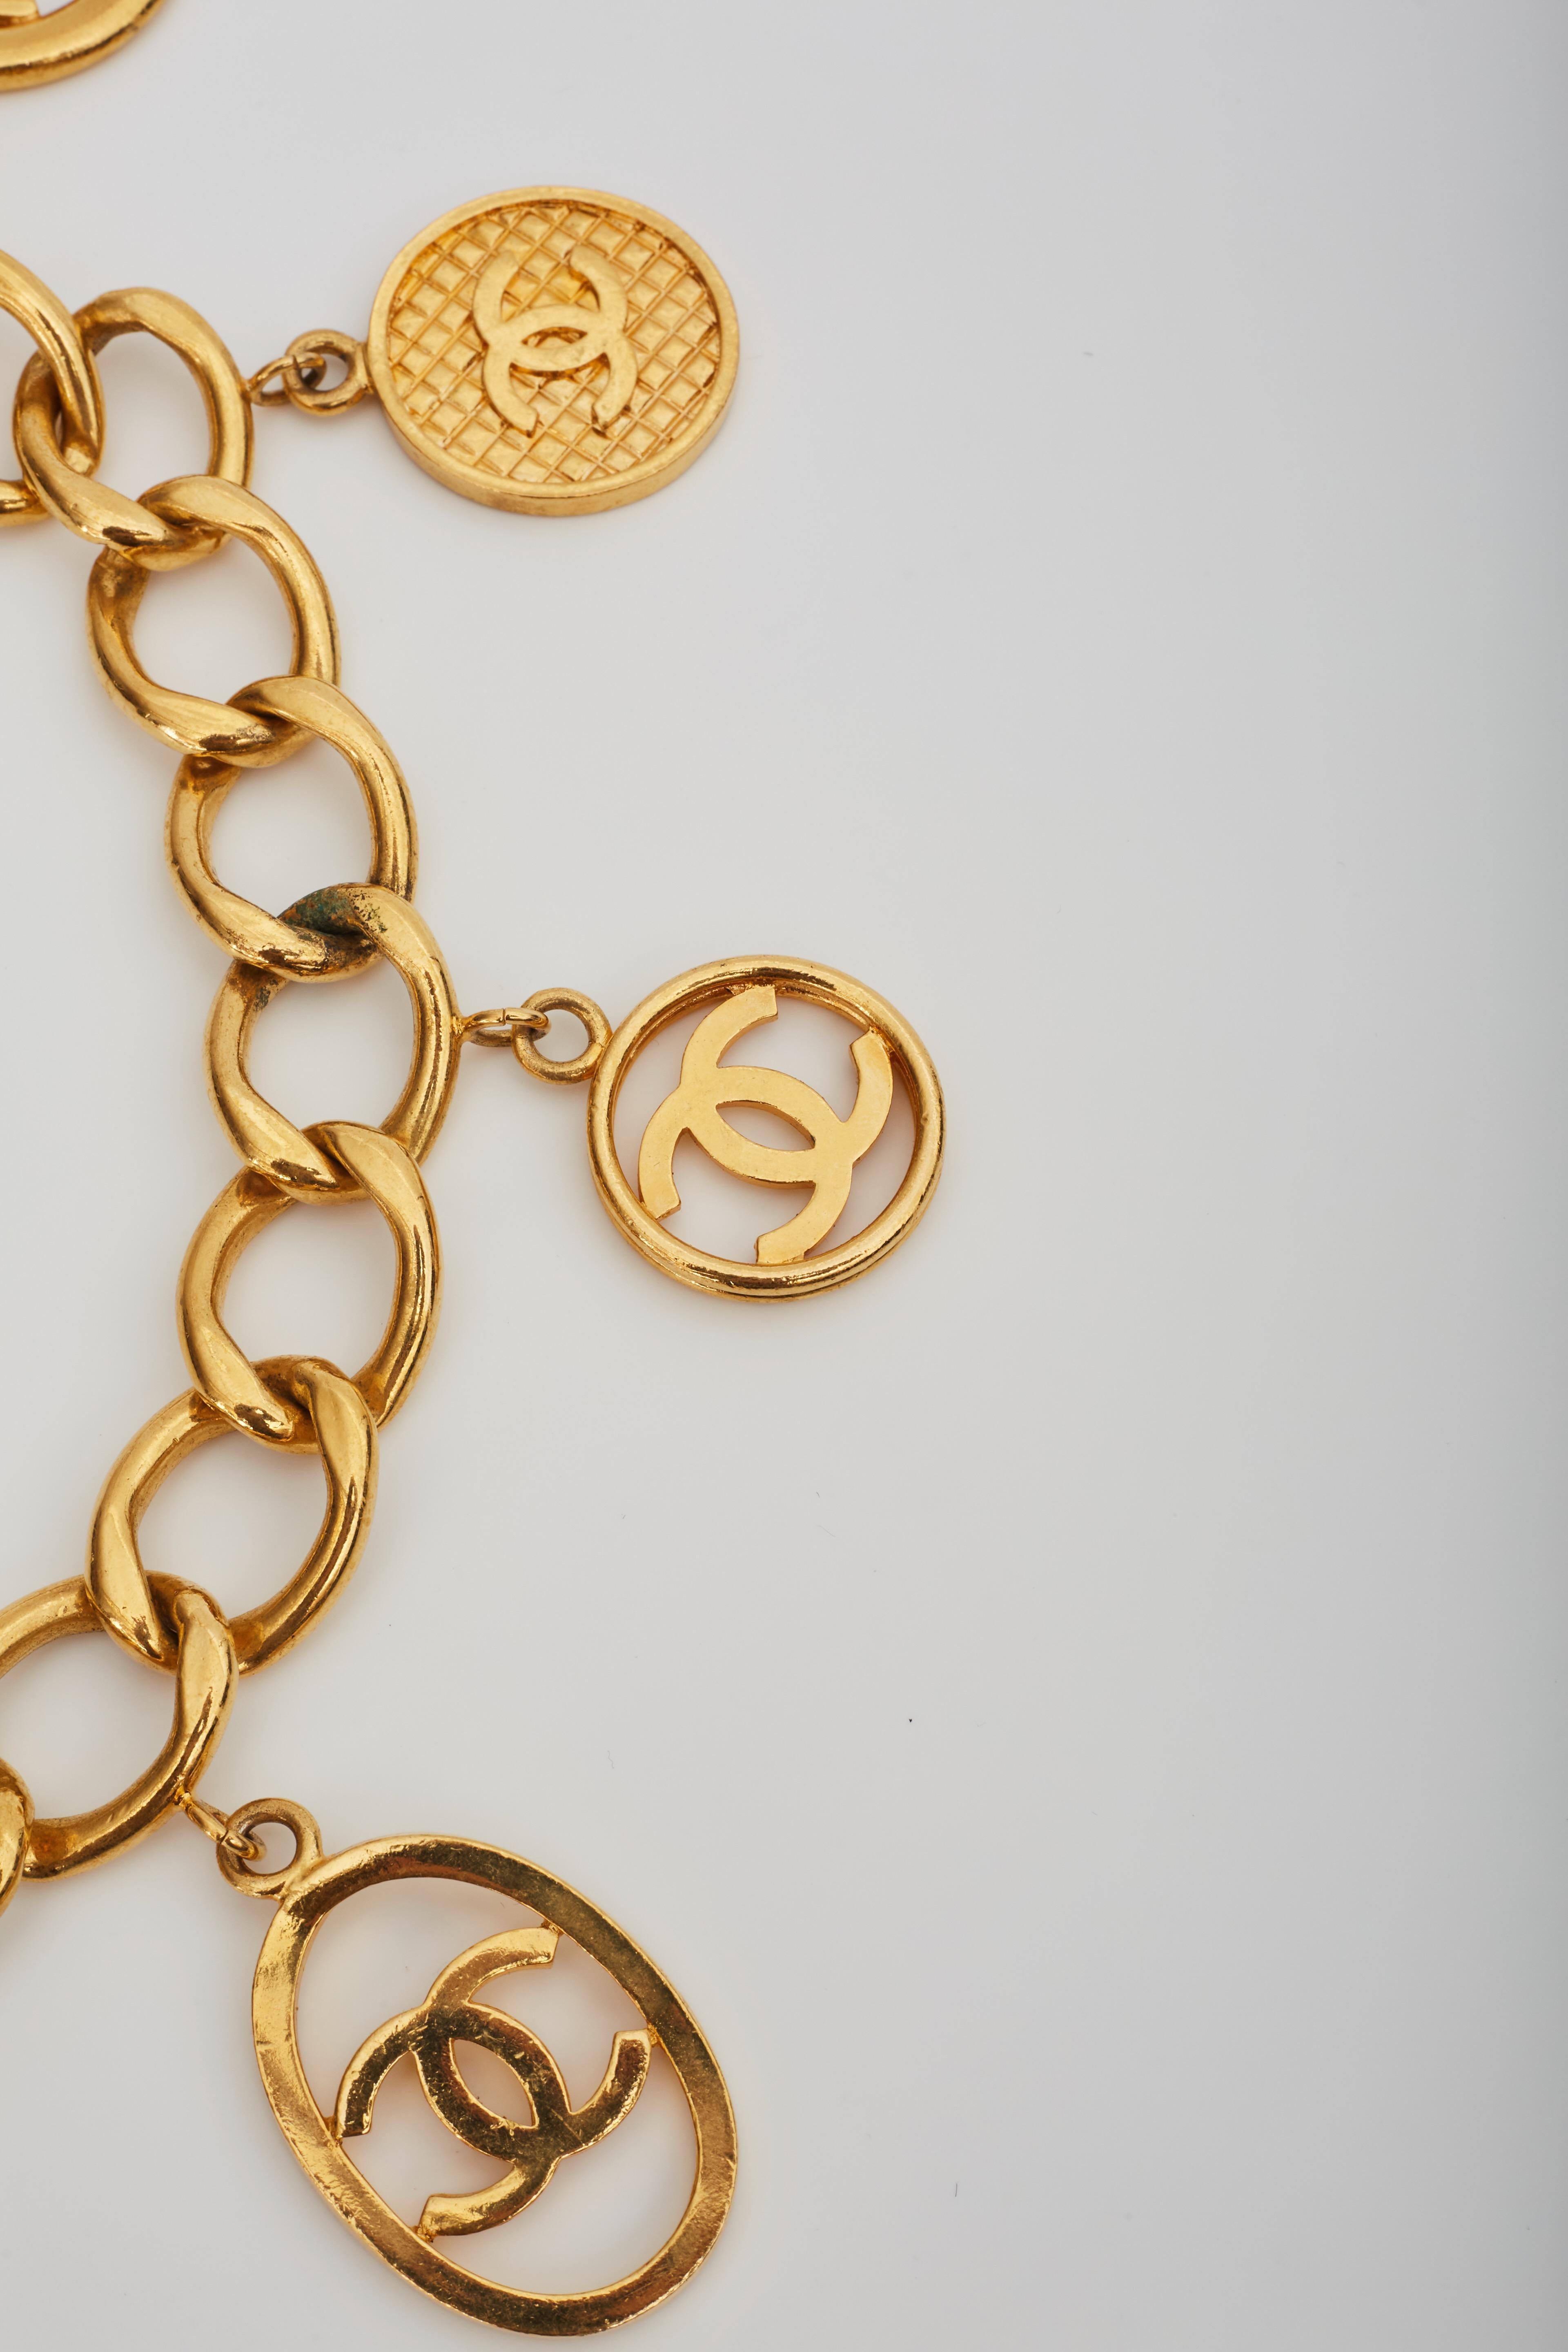 Chanel Logo Coin Medallion Charm Gold Chain Necklace Belt (1993) 26inch 4